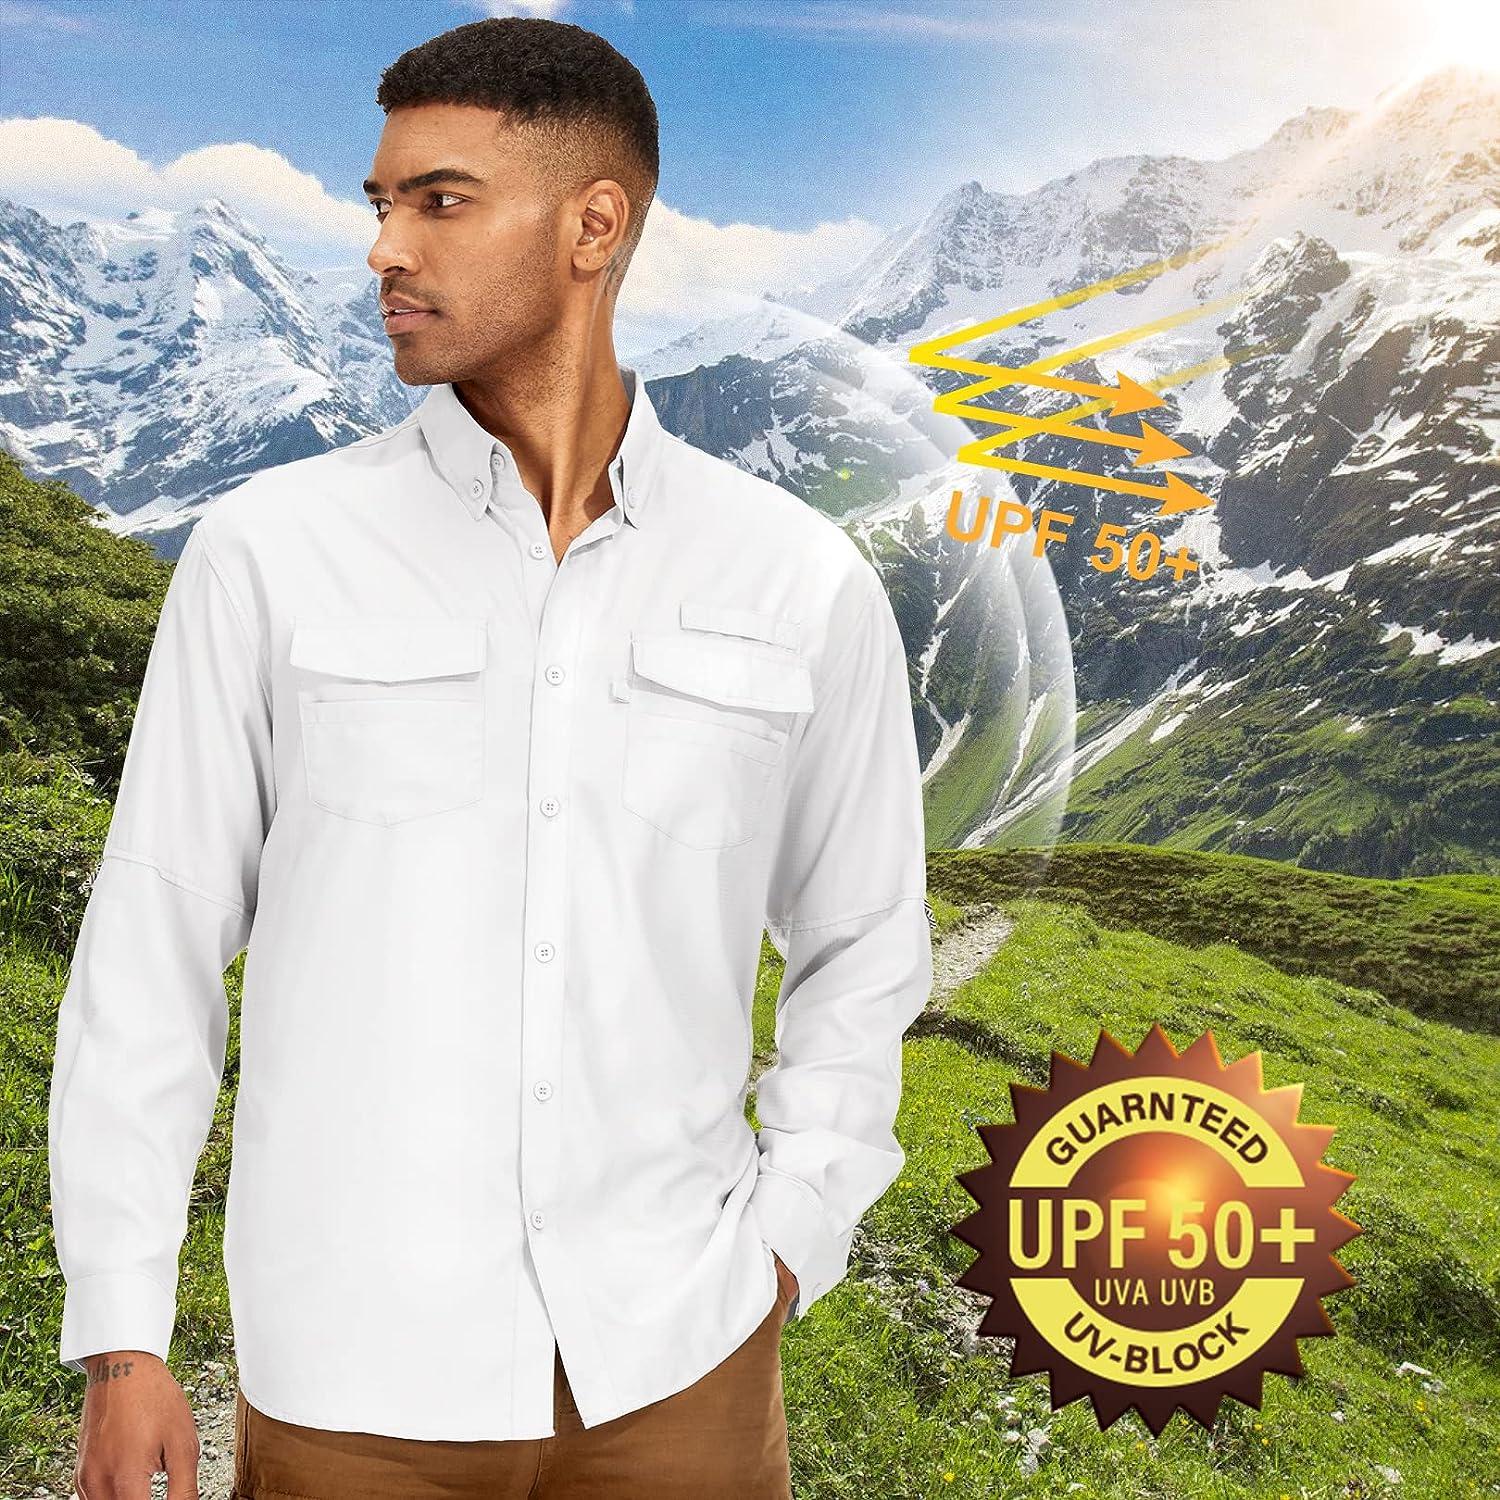 Asfixiado Mens Long Sleeve Fishing Shirts UV Protection UPF 50 + Outdoor  Quick Dry Lightweight Cooling Hiking Shirt 3X-Large 5069# White